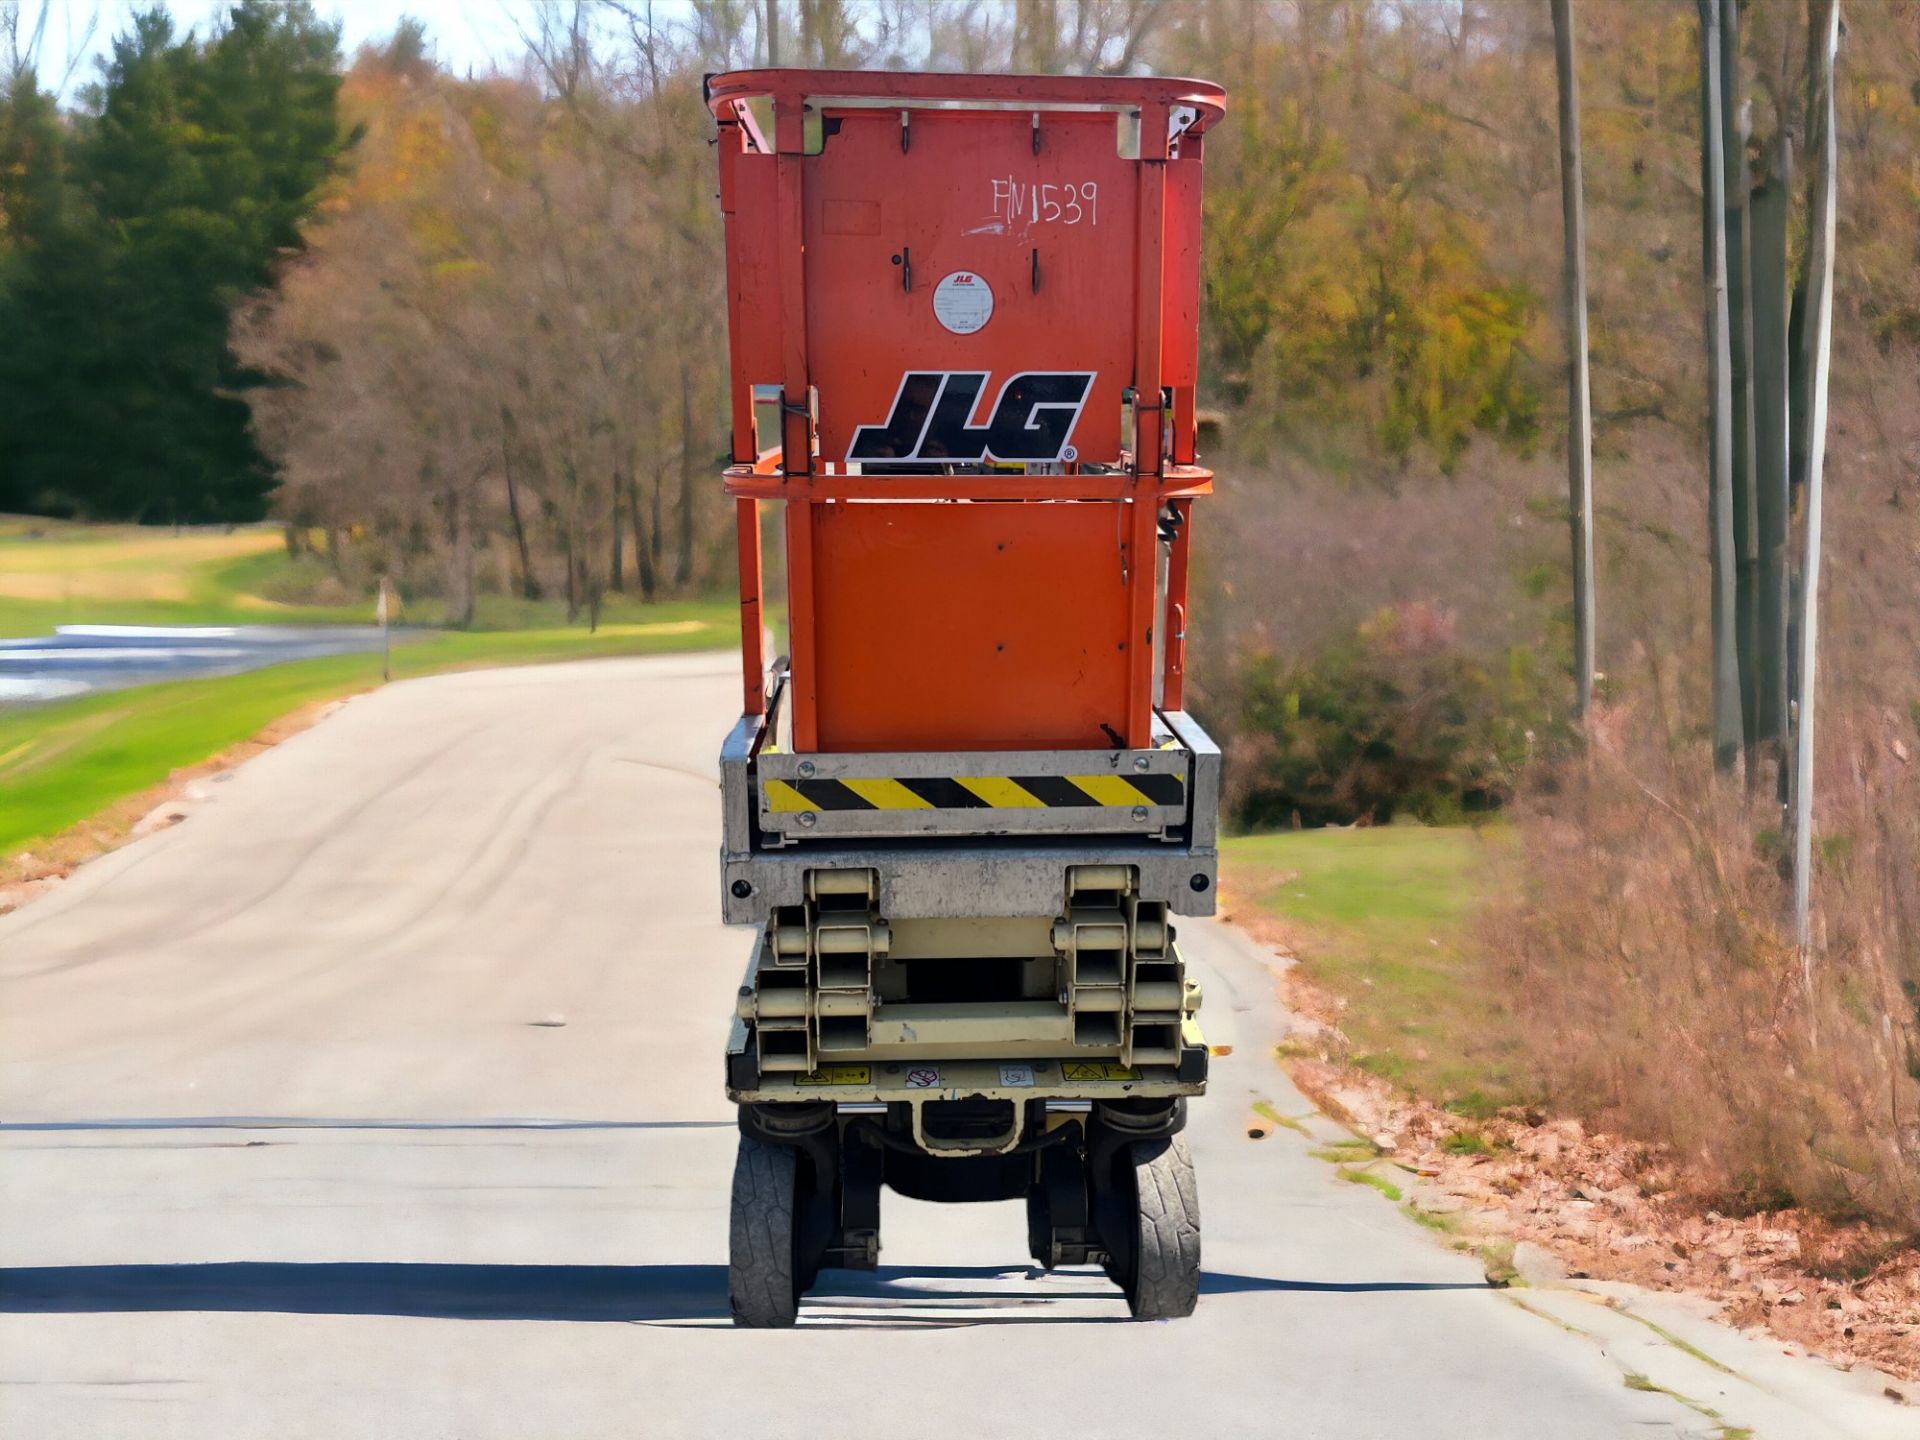 JLG 1930 ES ELECTRIC SCISSOR LIFT - 2011 **(INCLUDES CHARGER)** - Image 3 of 4